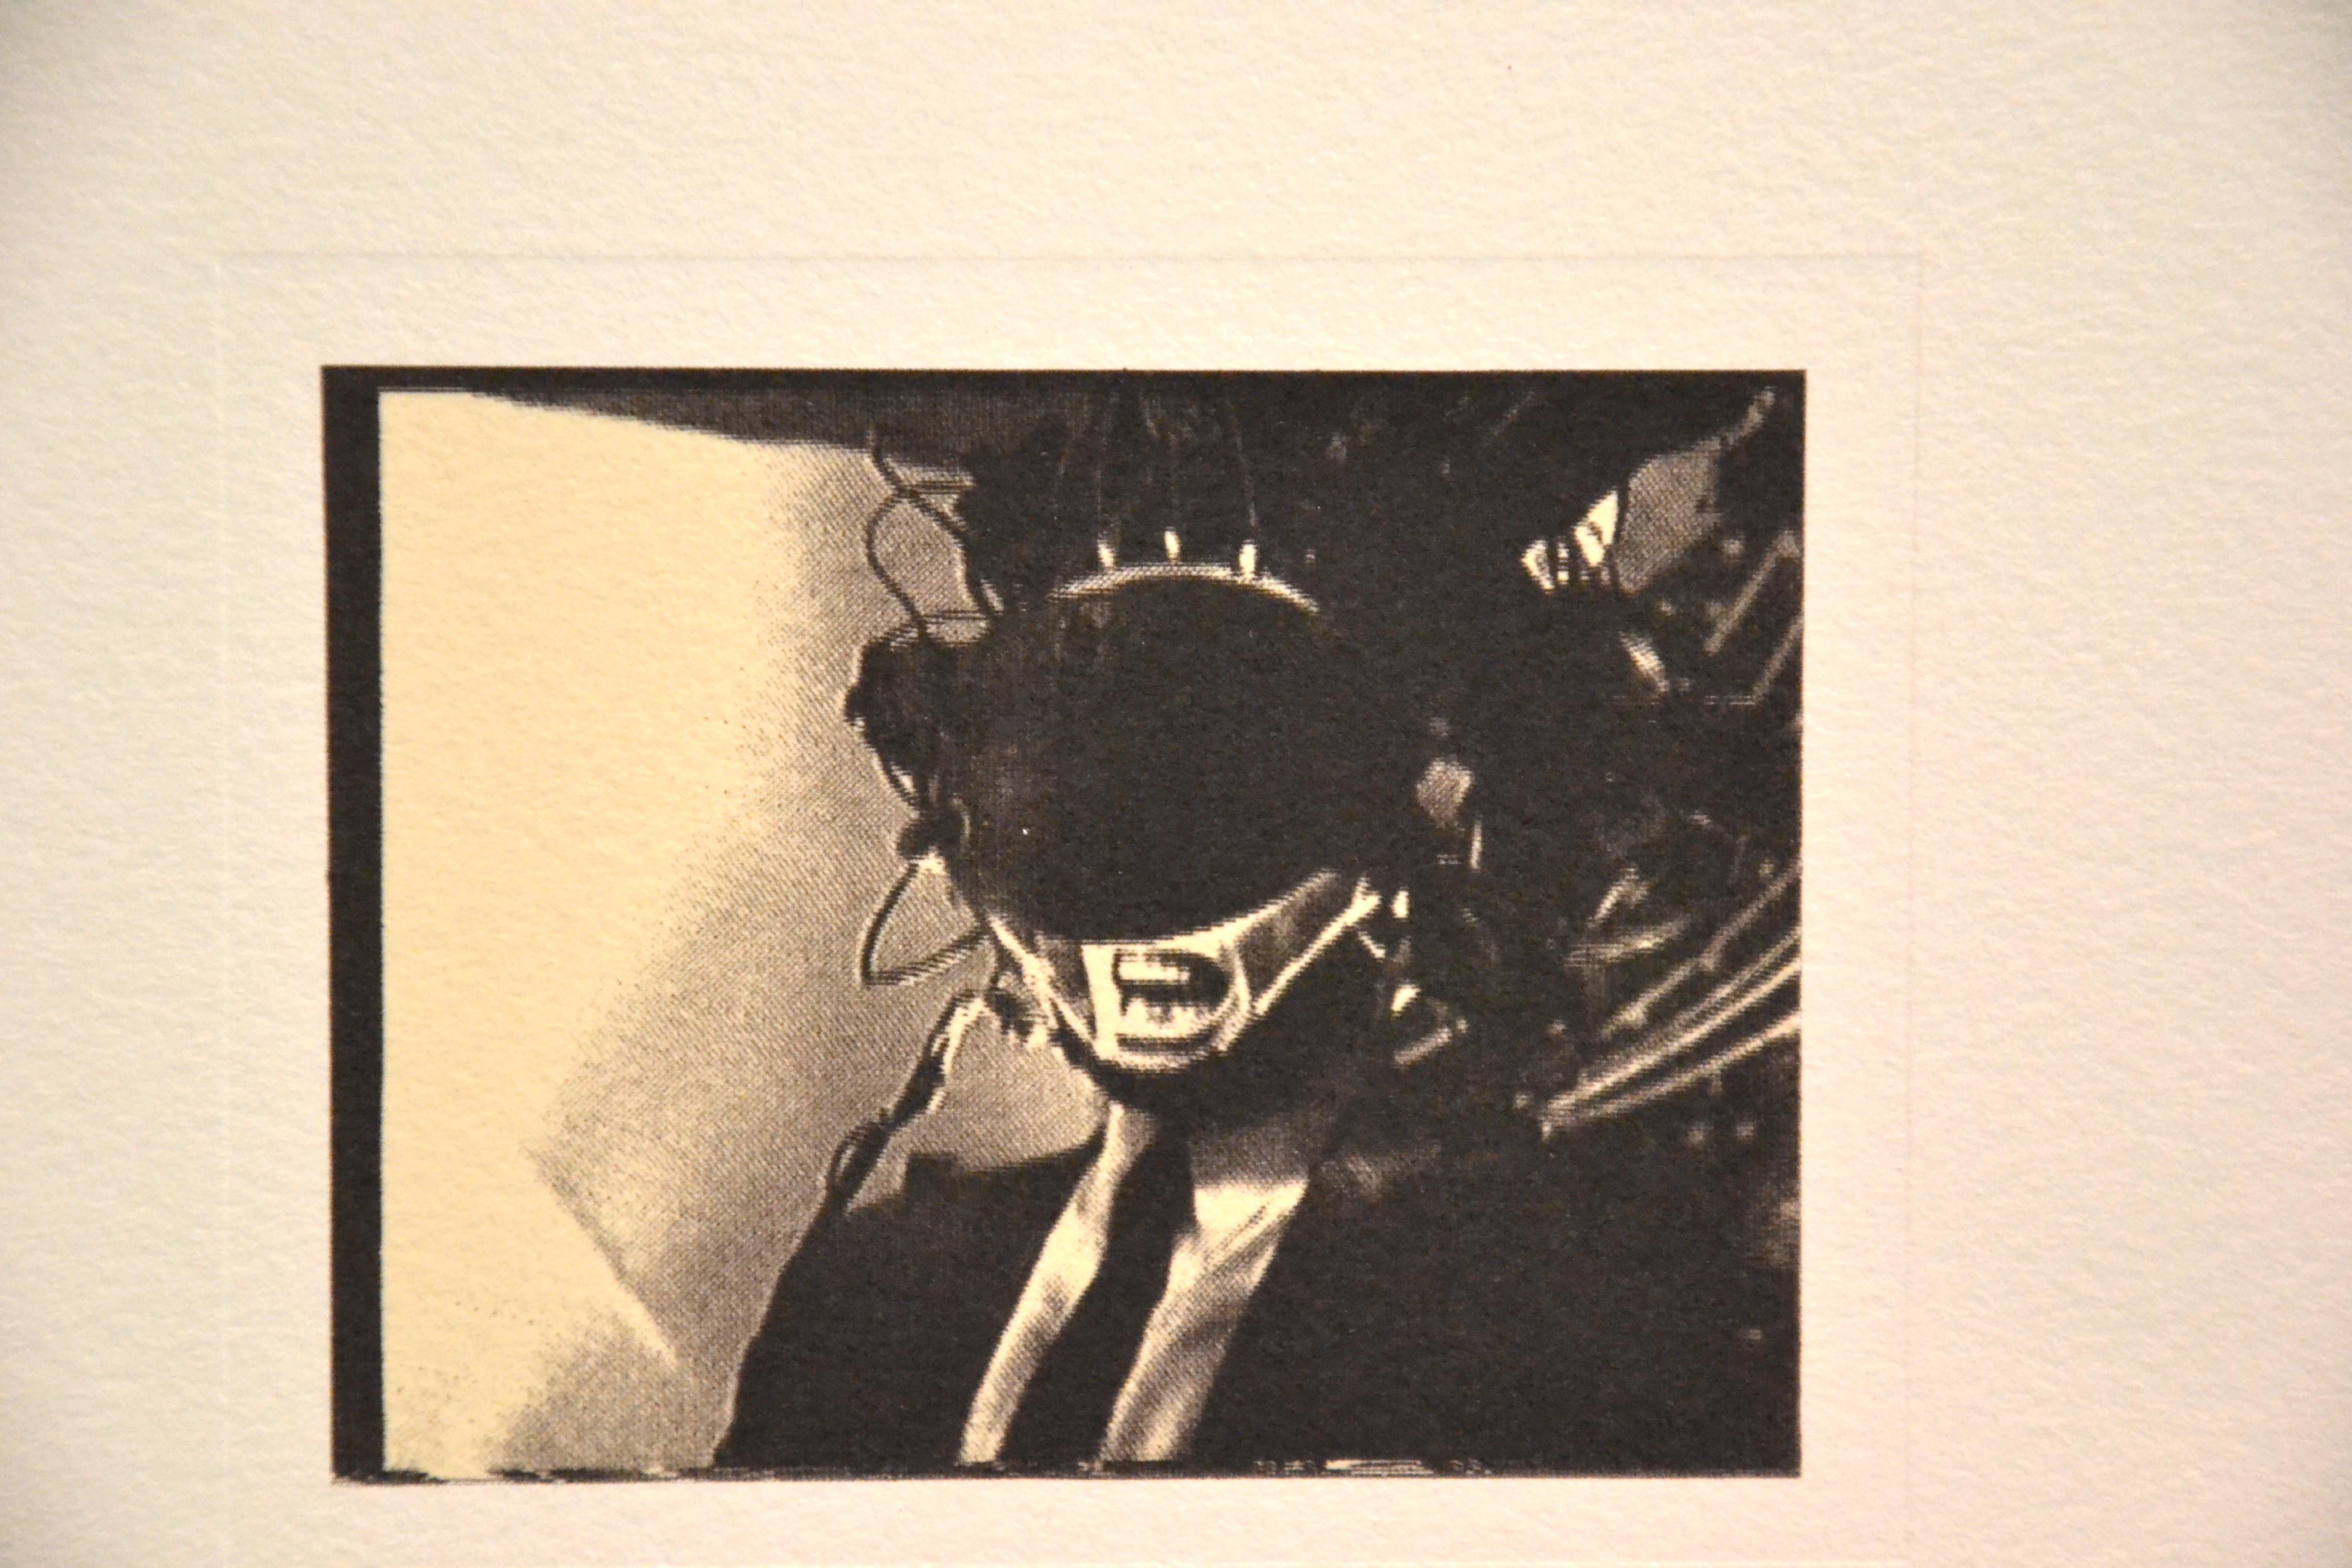 A Single Frame - From the “Mnemonic Pictures Folio” - Photolithograph by R.Longo - Contemporary Print by Robert Longo